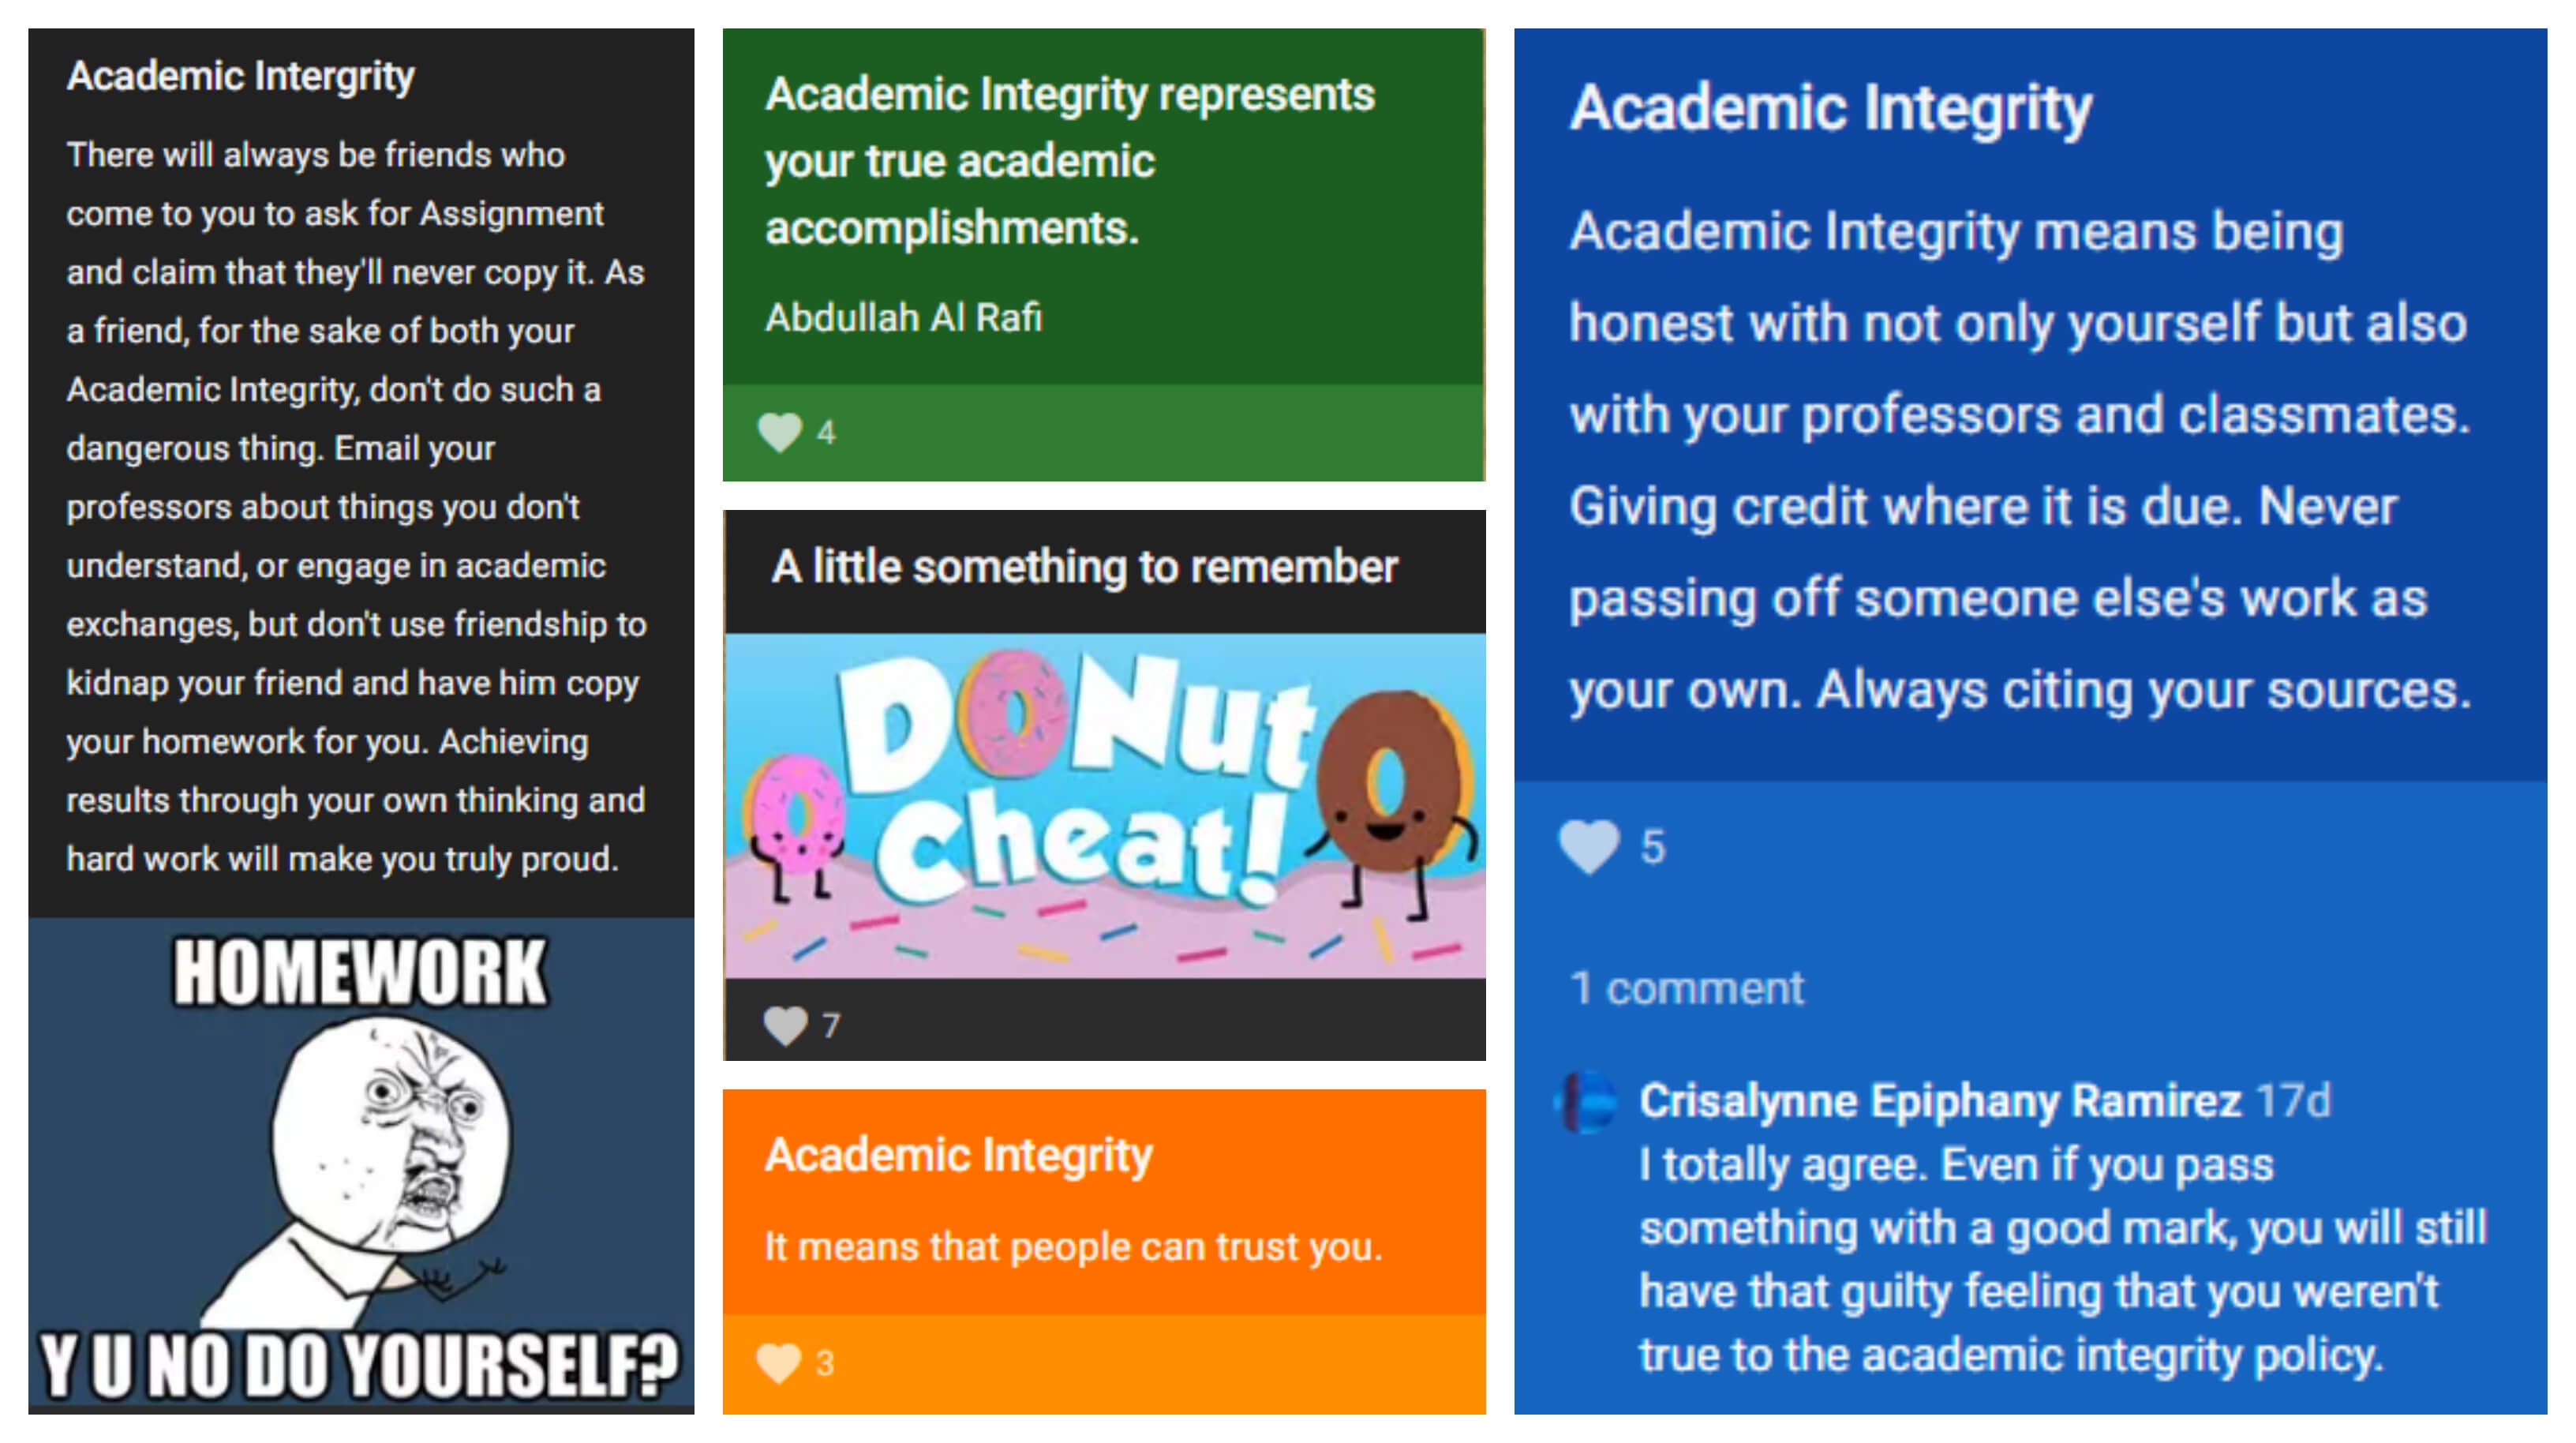 Screen captures from the Whiteboard Pledge Padlet (available at https://padlet.com/angelinamalik/Seneca). -- one Padlet post says, "There will always be friends who come to you to ask for Assignment and claim that they'll never copy it. As a friend, for the sake of both your Academic integrity, don't so such a dangerous thing. Email your professor about things you don't understand, or engage in academic exchanges, but don't use friendship to kidnap your friend and have him copy your homework for you. Achieving results through your own thinking and hard work will make you truly proud." The user also posted a meme that says, "HOMEWORK -- Y U NO DO YOURSELF?" -- another Padlet post says, "Academic Integrity represents your true academic accomplishments" -- another Padlet post says, "Academic Integrity means being honest with not only yourself but also with your professors and classmates. Giving credit where it is due. Never passing off someone else's work as your own. Always citing your sources." Someone commented on this post, saying, "I totally agree. Even if you pass something with a good mark, you will still have that guilty feeling that you weren't true to the academic integrity policy." --another Pledge Padlet (available at https://padlet.com/angelinamalik/Seneca); this Padlet post says, "A little something to remember: Donut cheat!" (It contains drawings of donuts.) -- and the final Padlet post says, "Academic Integrity means that people can trust you"